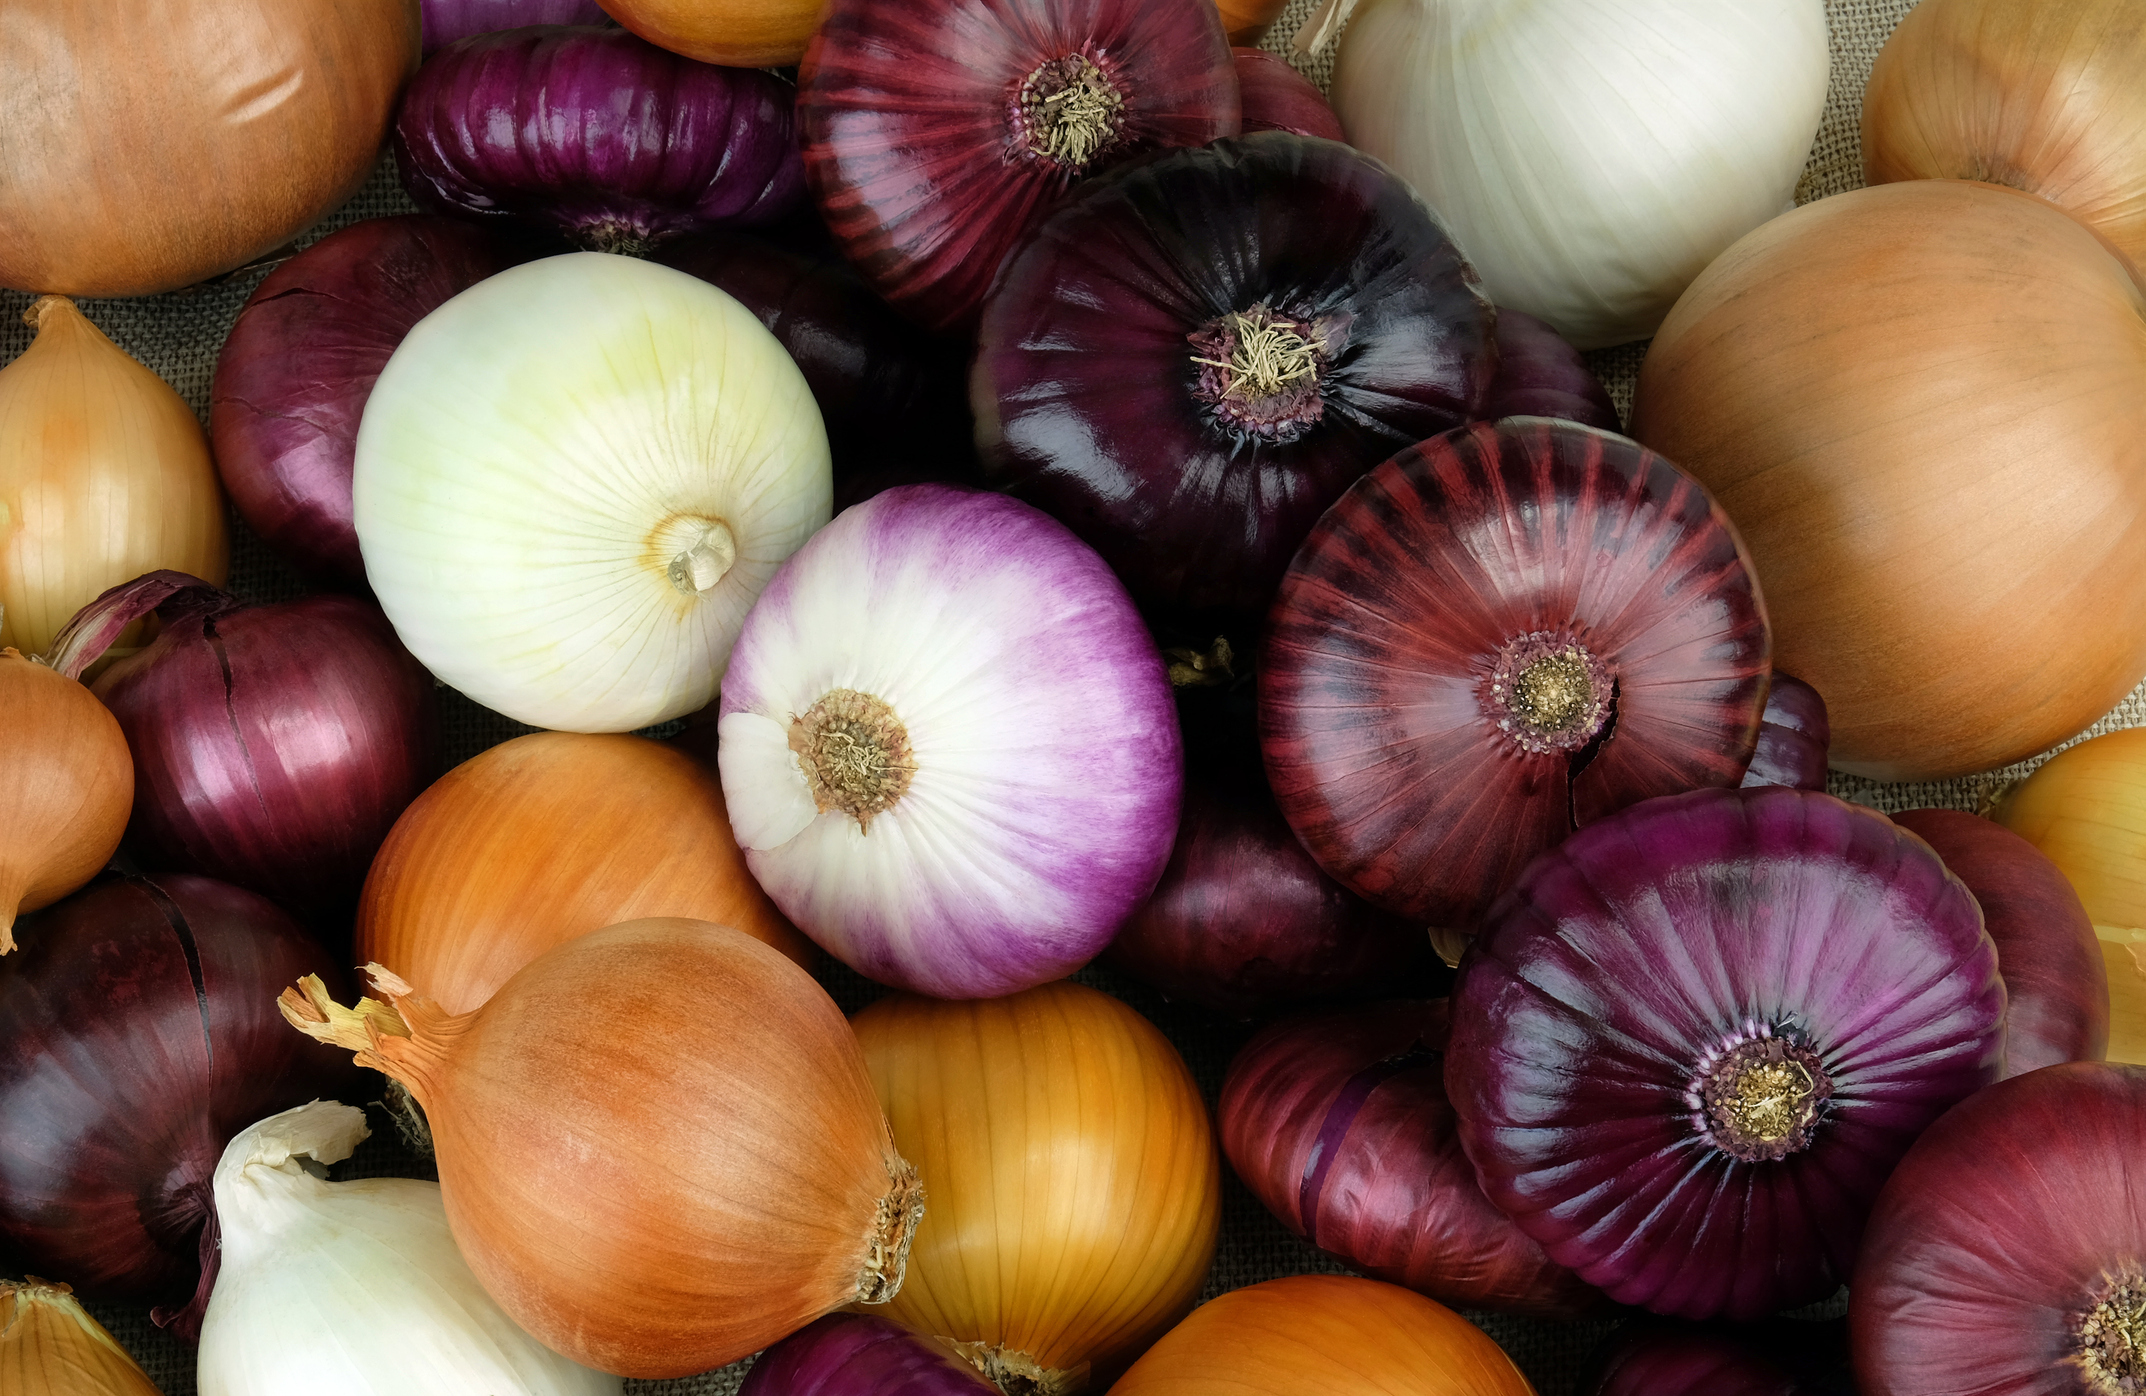 Red, white and yellow onions.